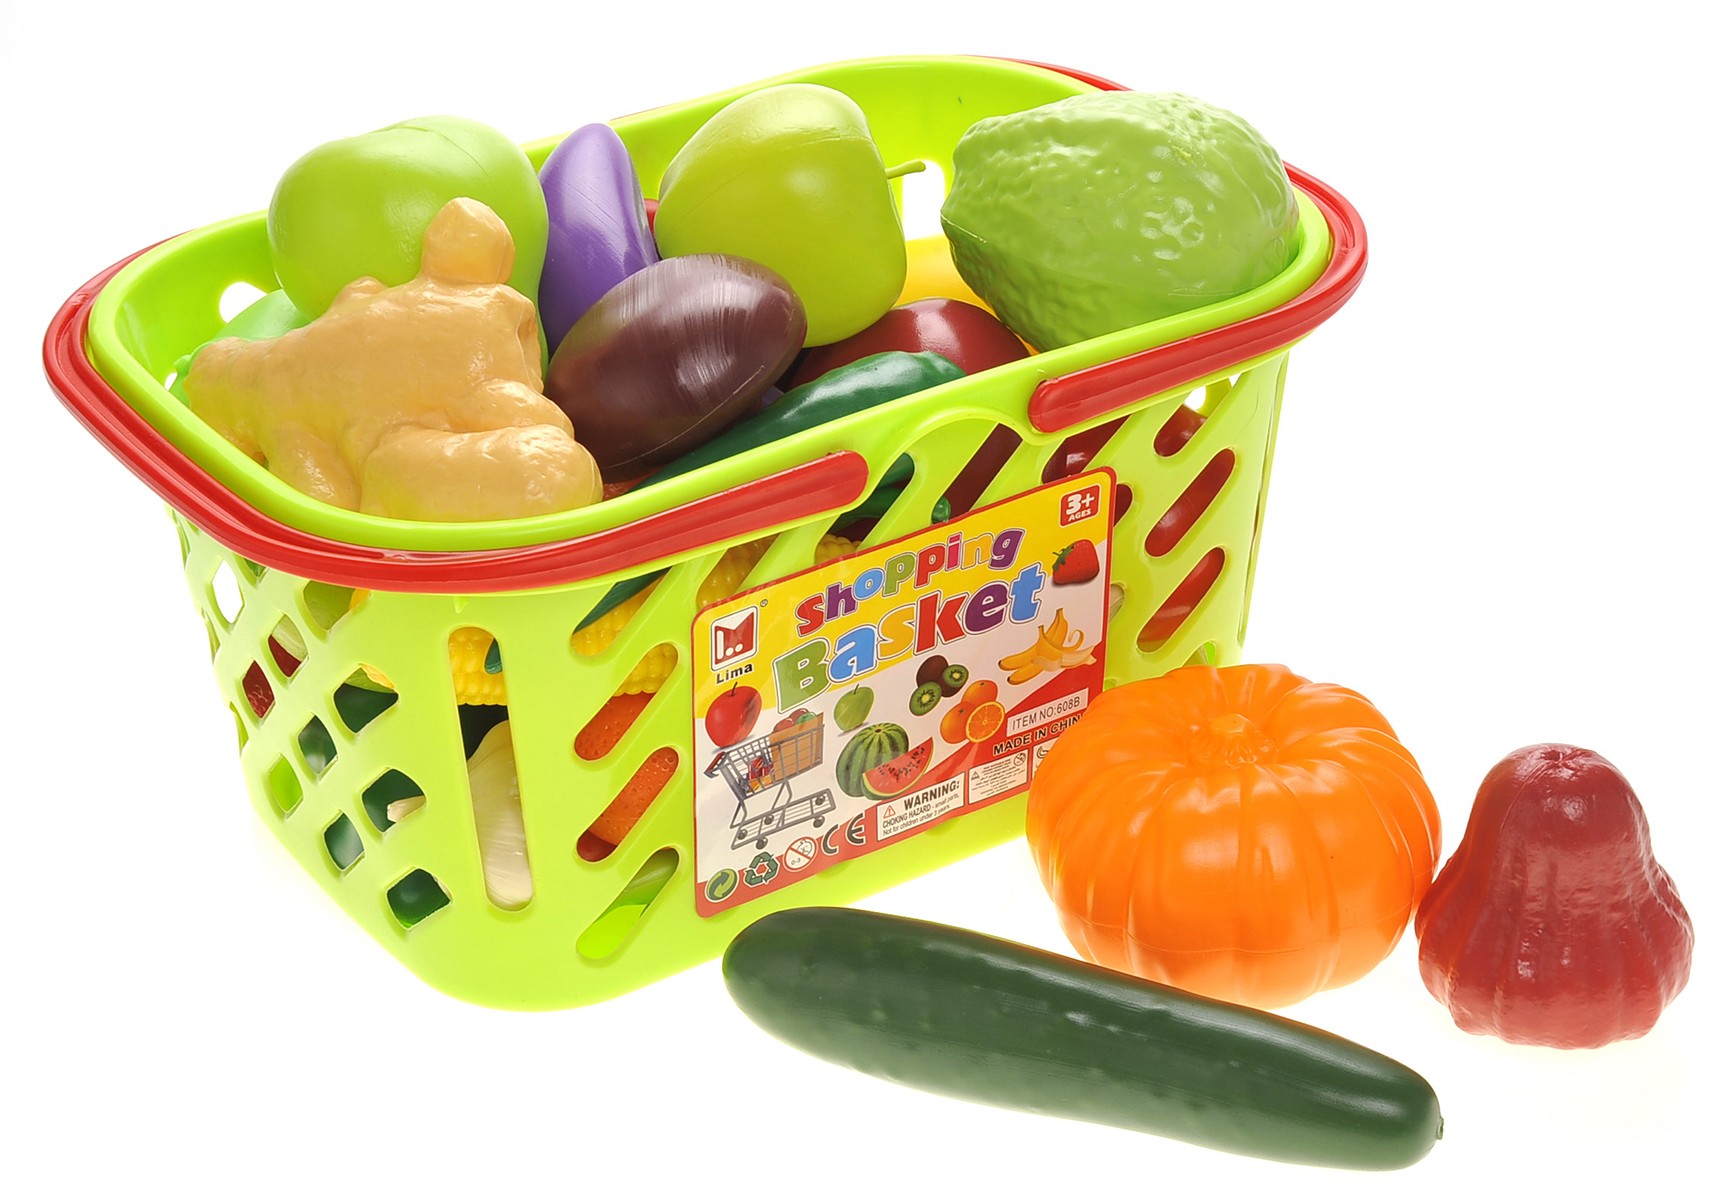 Fruits And Vegetables Shopping Basket Grocery Play Food Set For Kids 